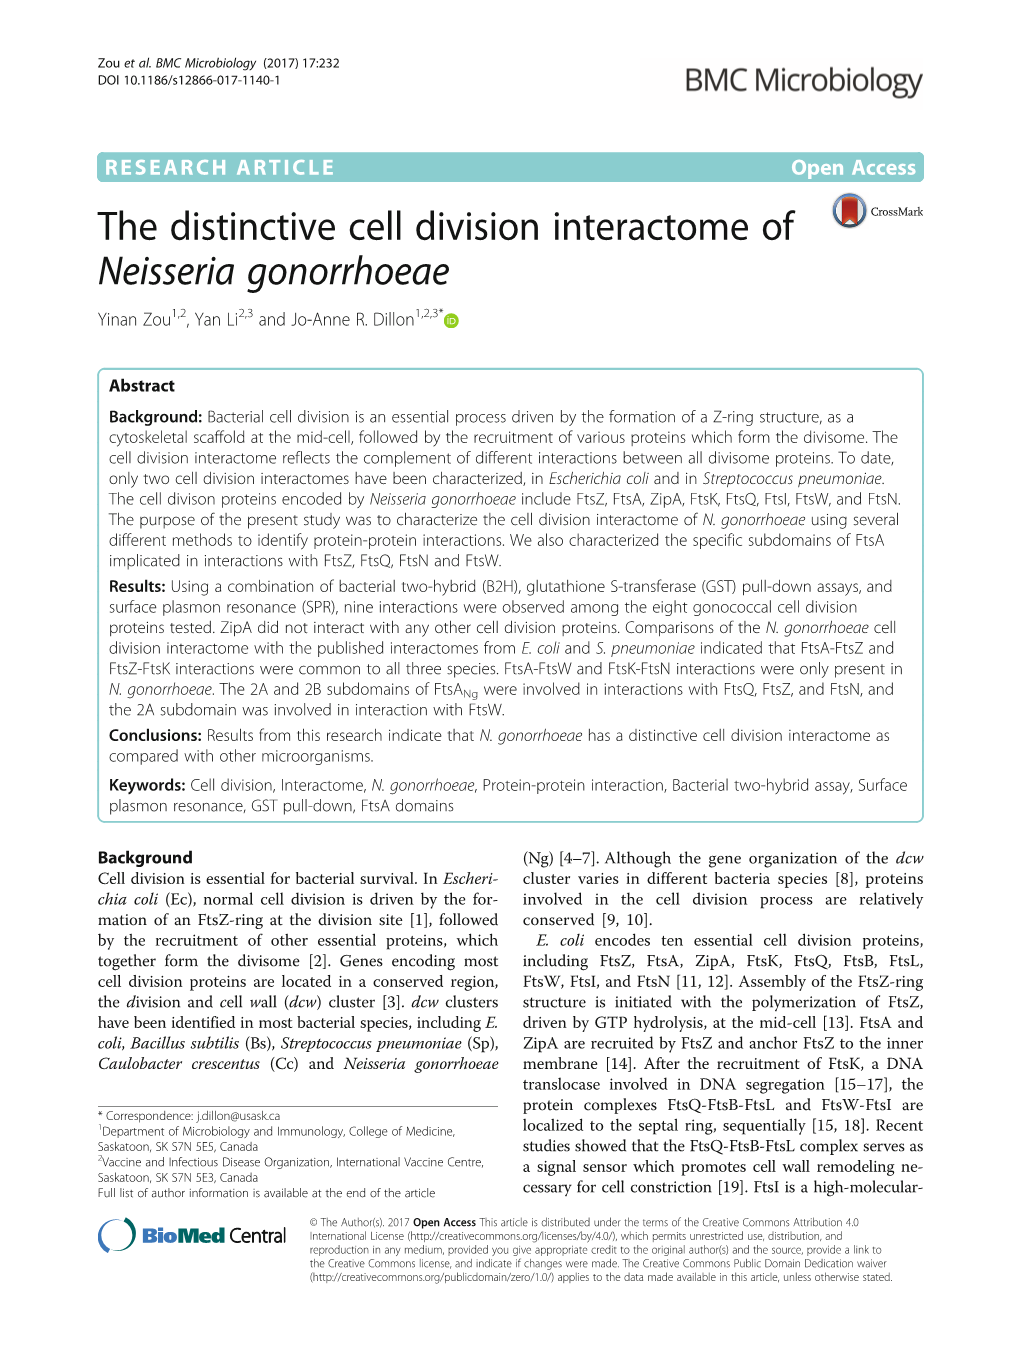 The Distinctive Cell Division Interactome of Neisseria Gonorrhoeae Yinan Zou1,2, Yan Li2,3 and Jo-Anne R